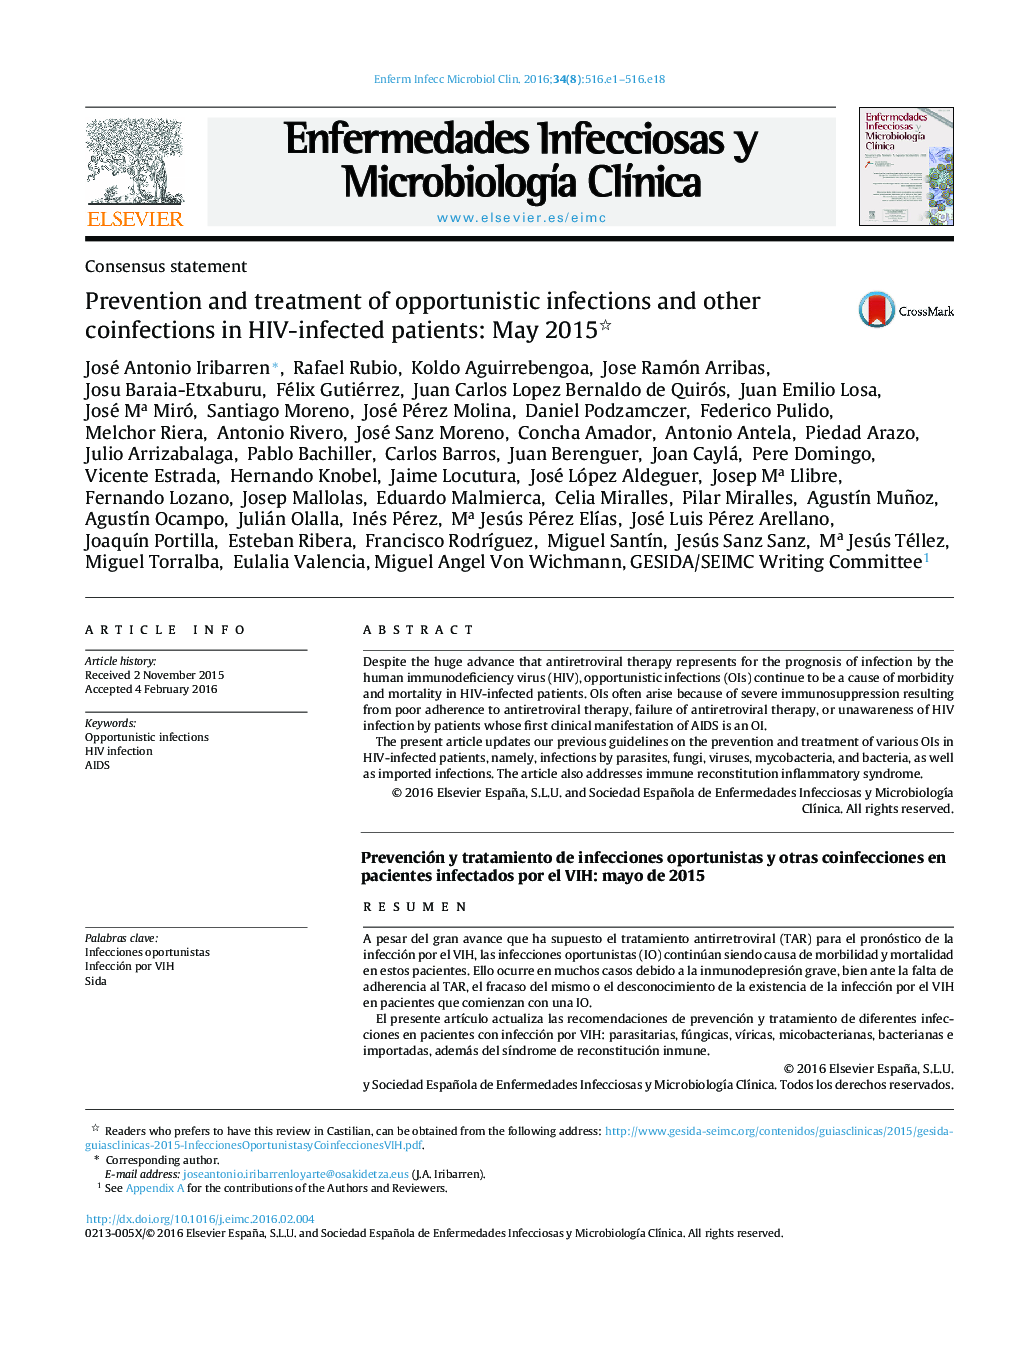 Prevention and treatment of opportunistic infections and other coinfections in HIV-infected patients: May 2015